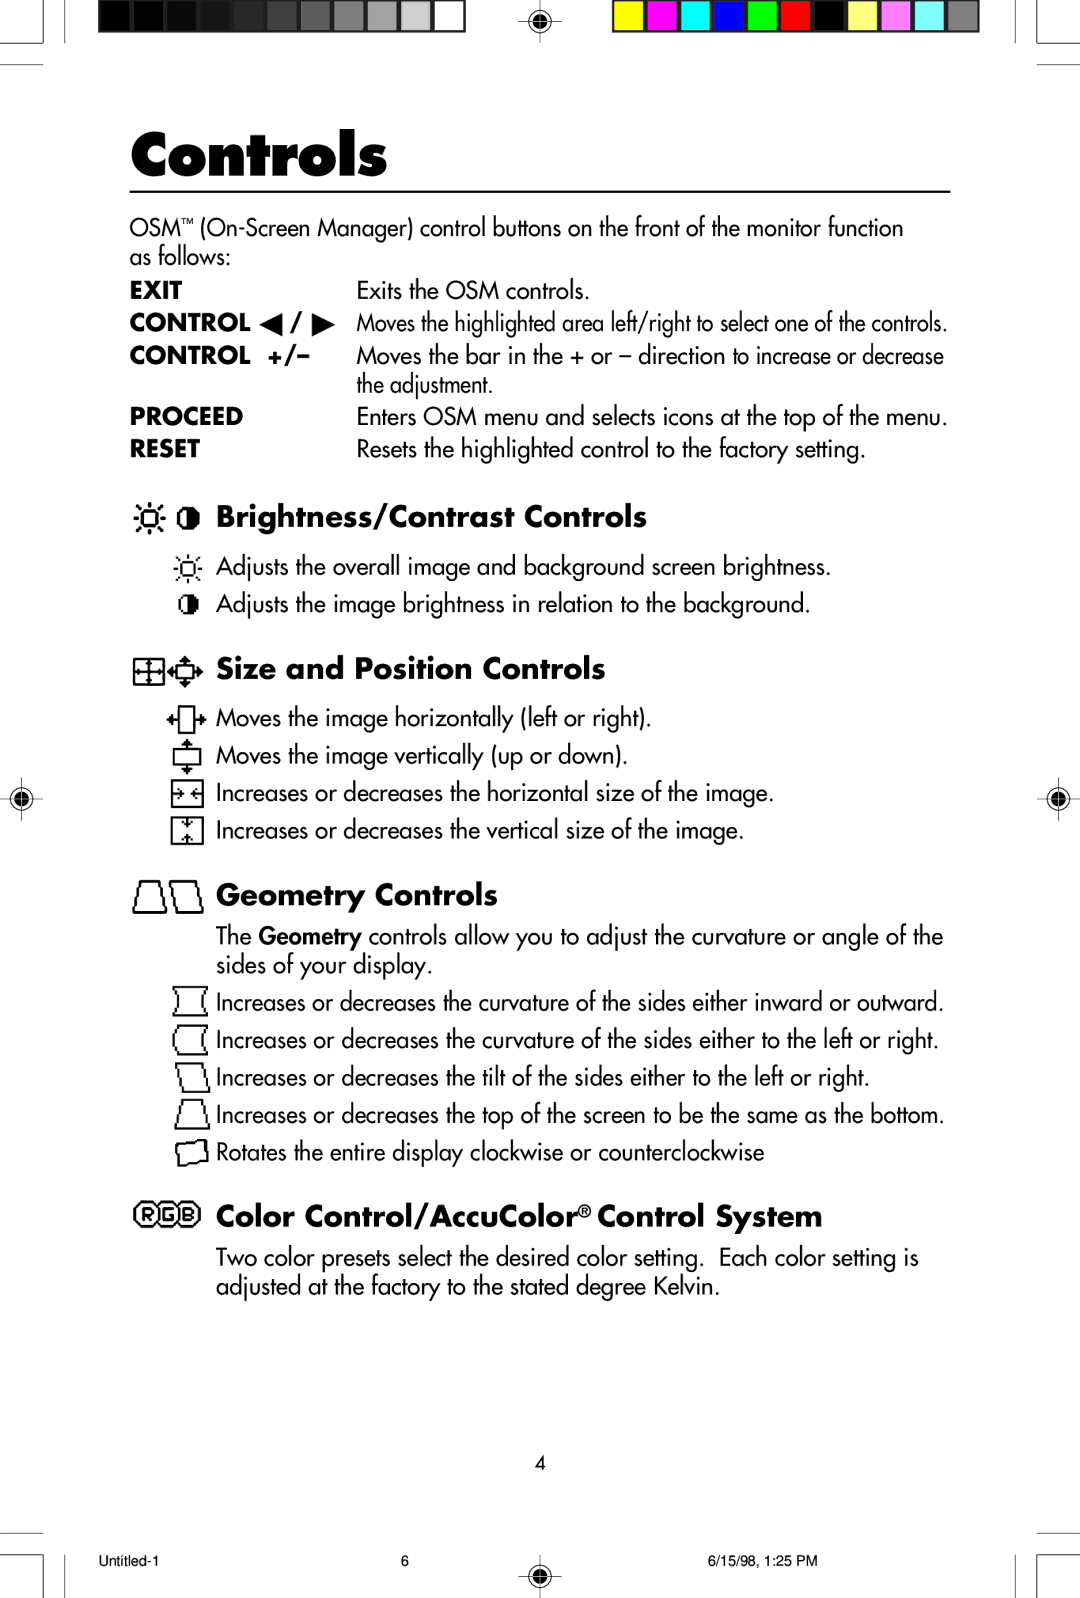 NEC JC-1941UMA user manual Controls, Adjustment, Resets the highlighted control to the factory setting 